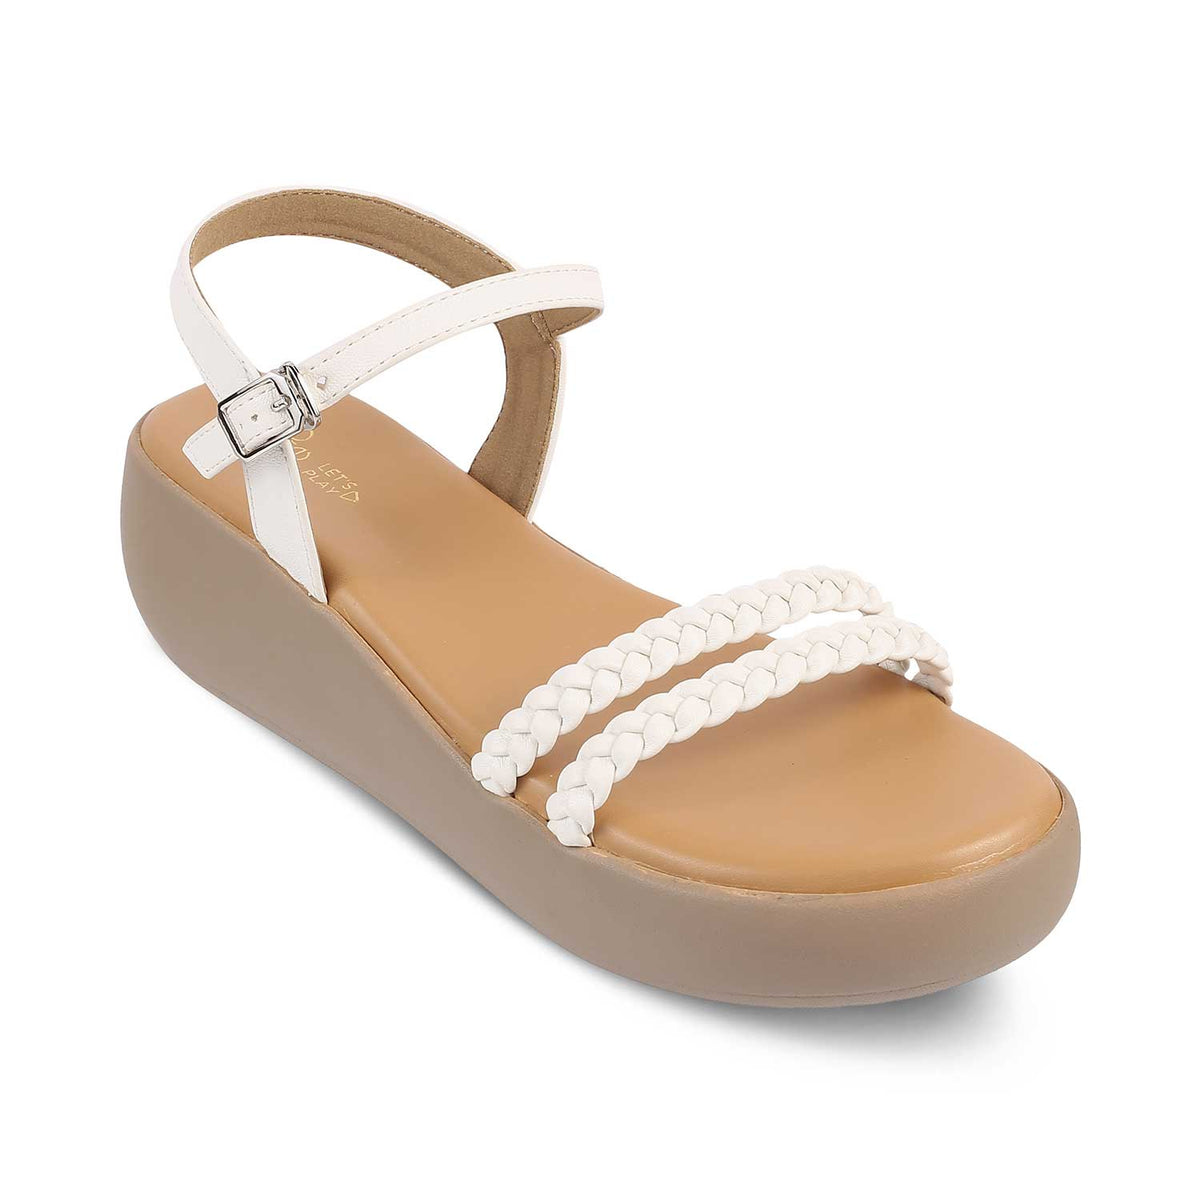 The Seev White Women's Dress Wedge Sandals Tresmode